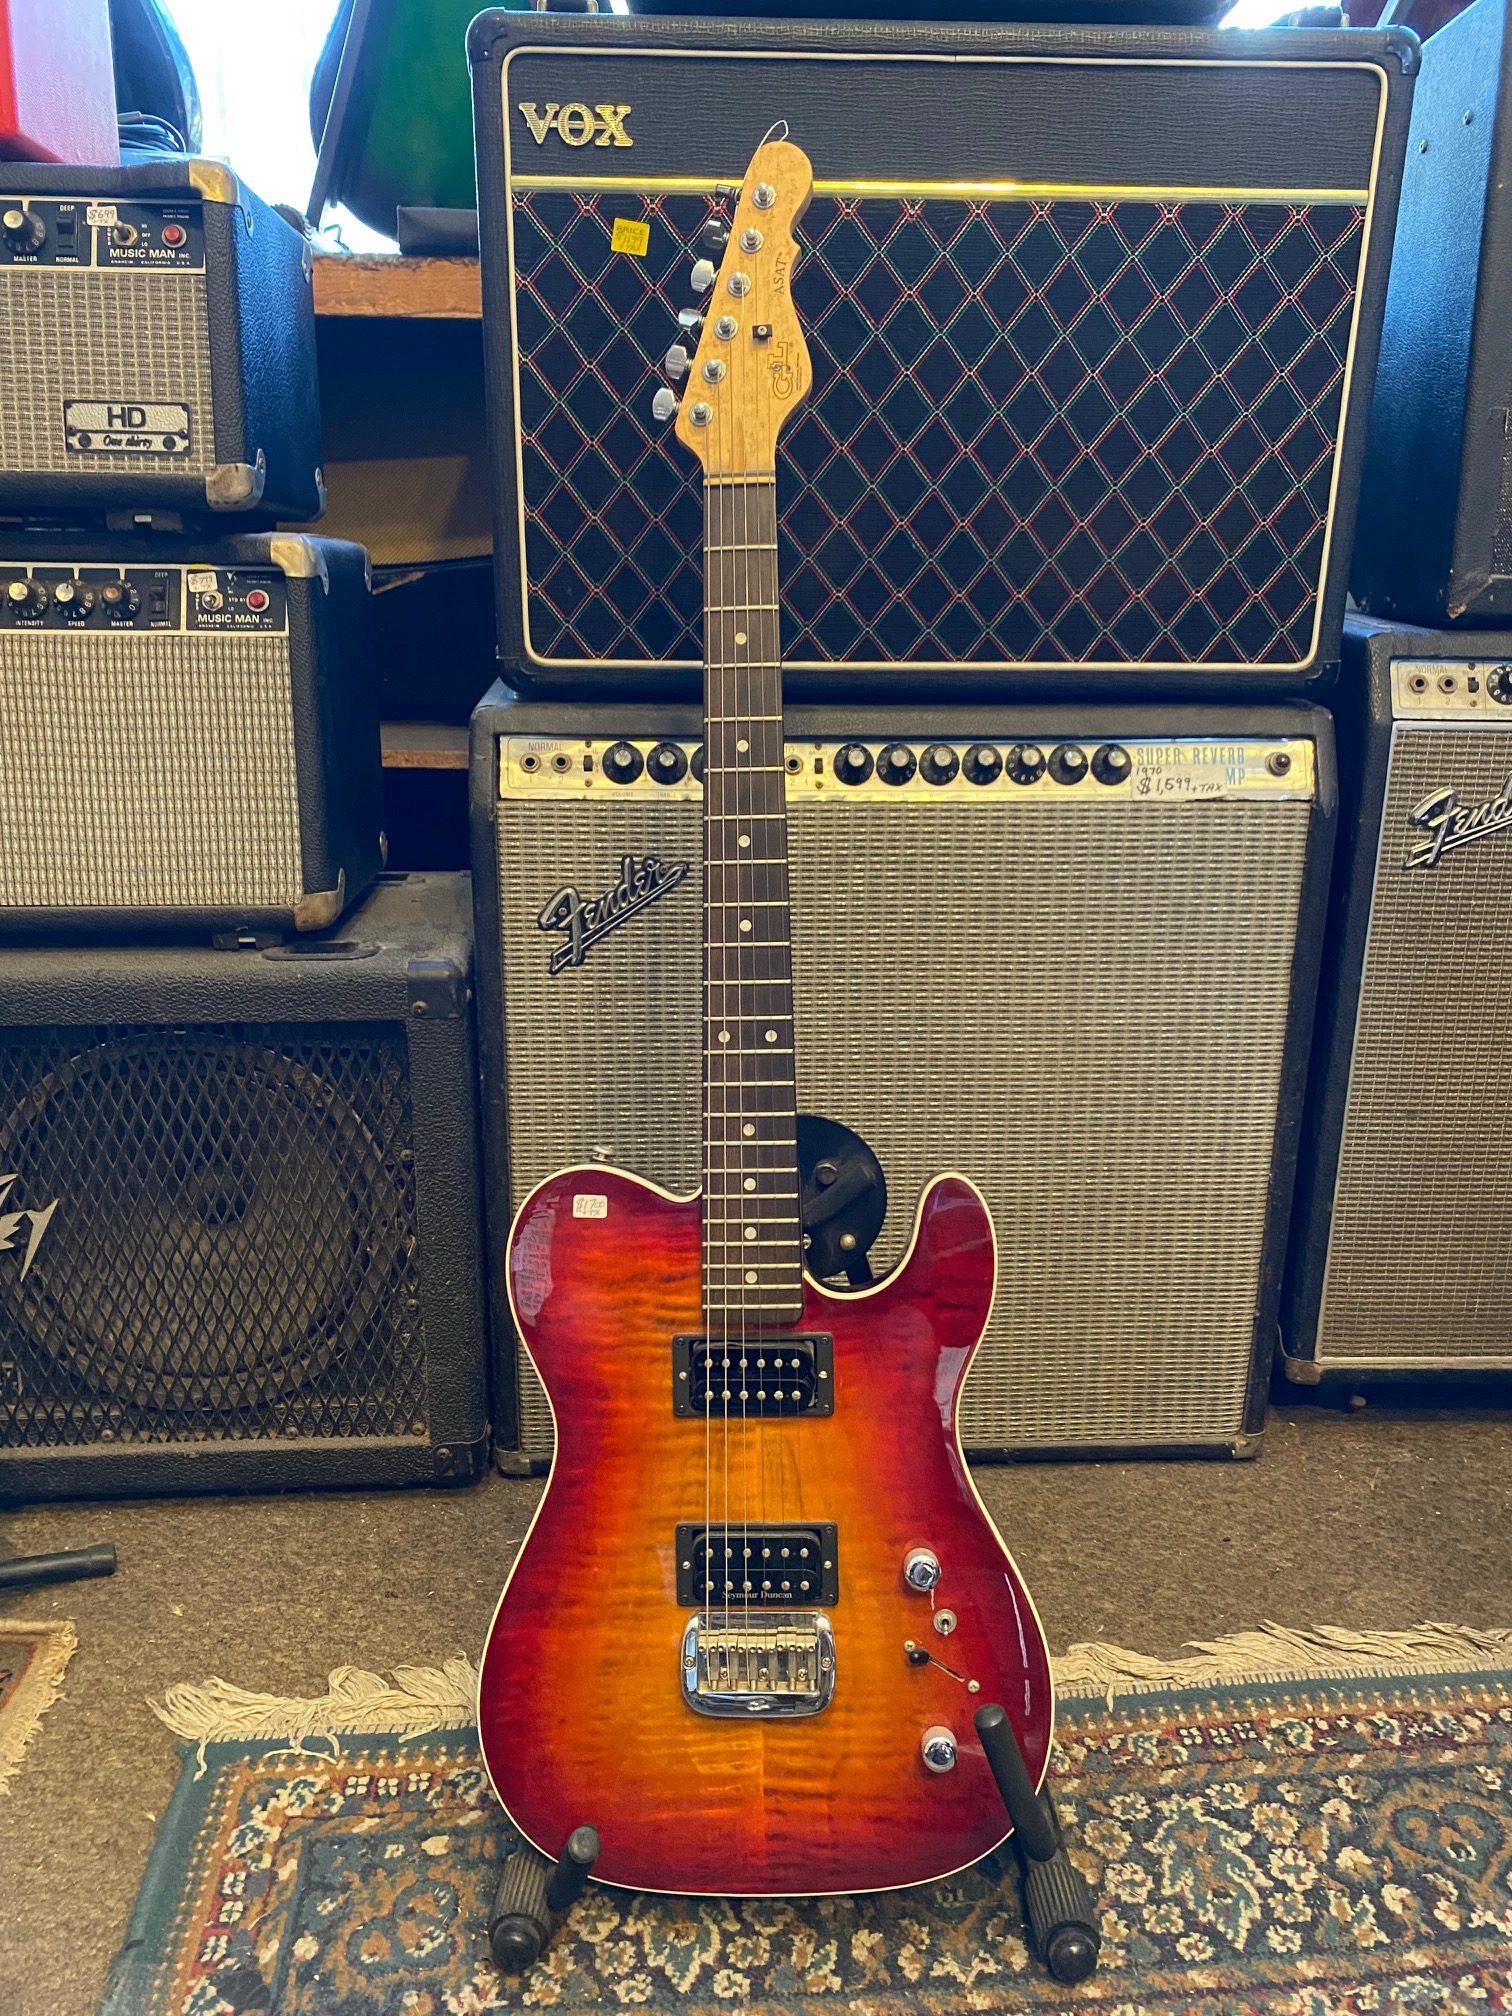 G&L ASAT: Mahogany Body FLAME TOP Coil Tap 10.0 $1700 w/ H.S. Case